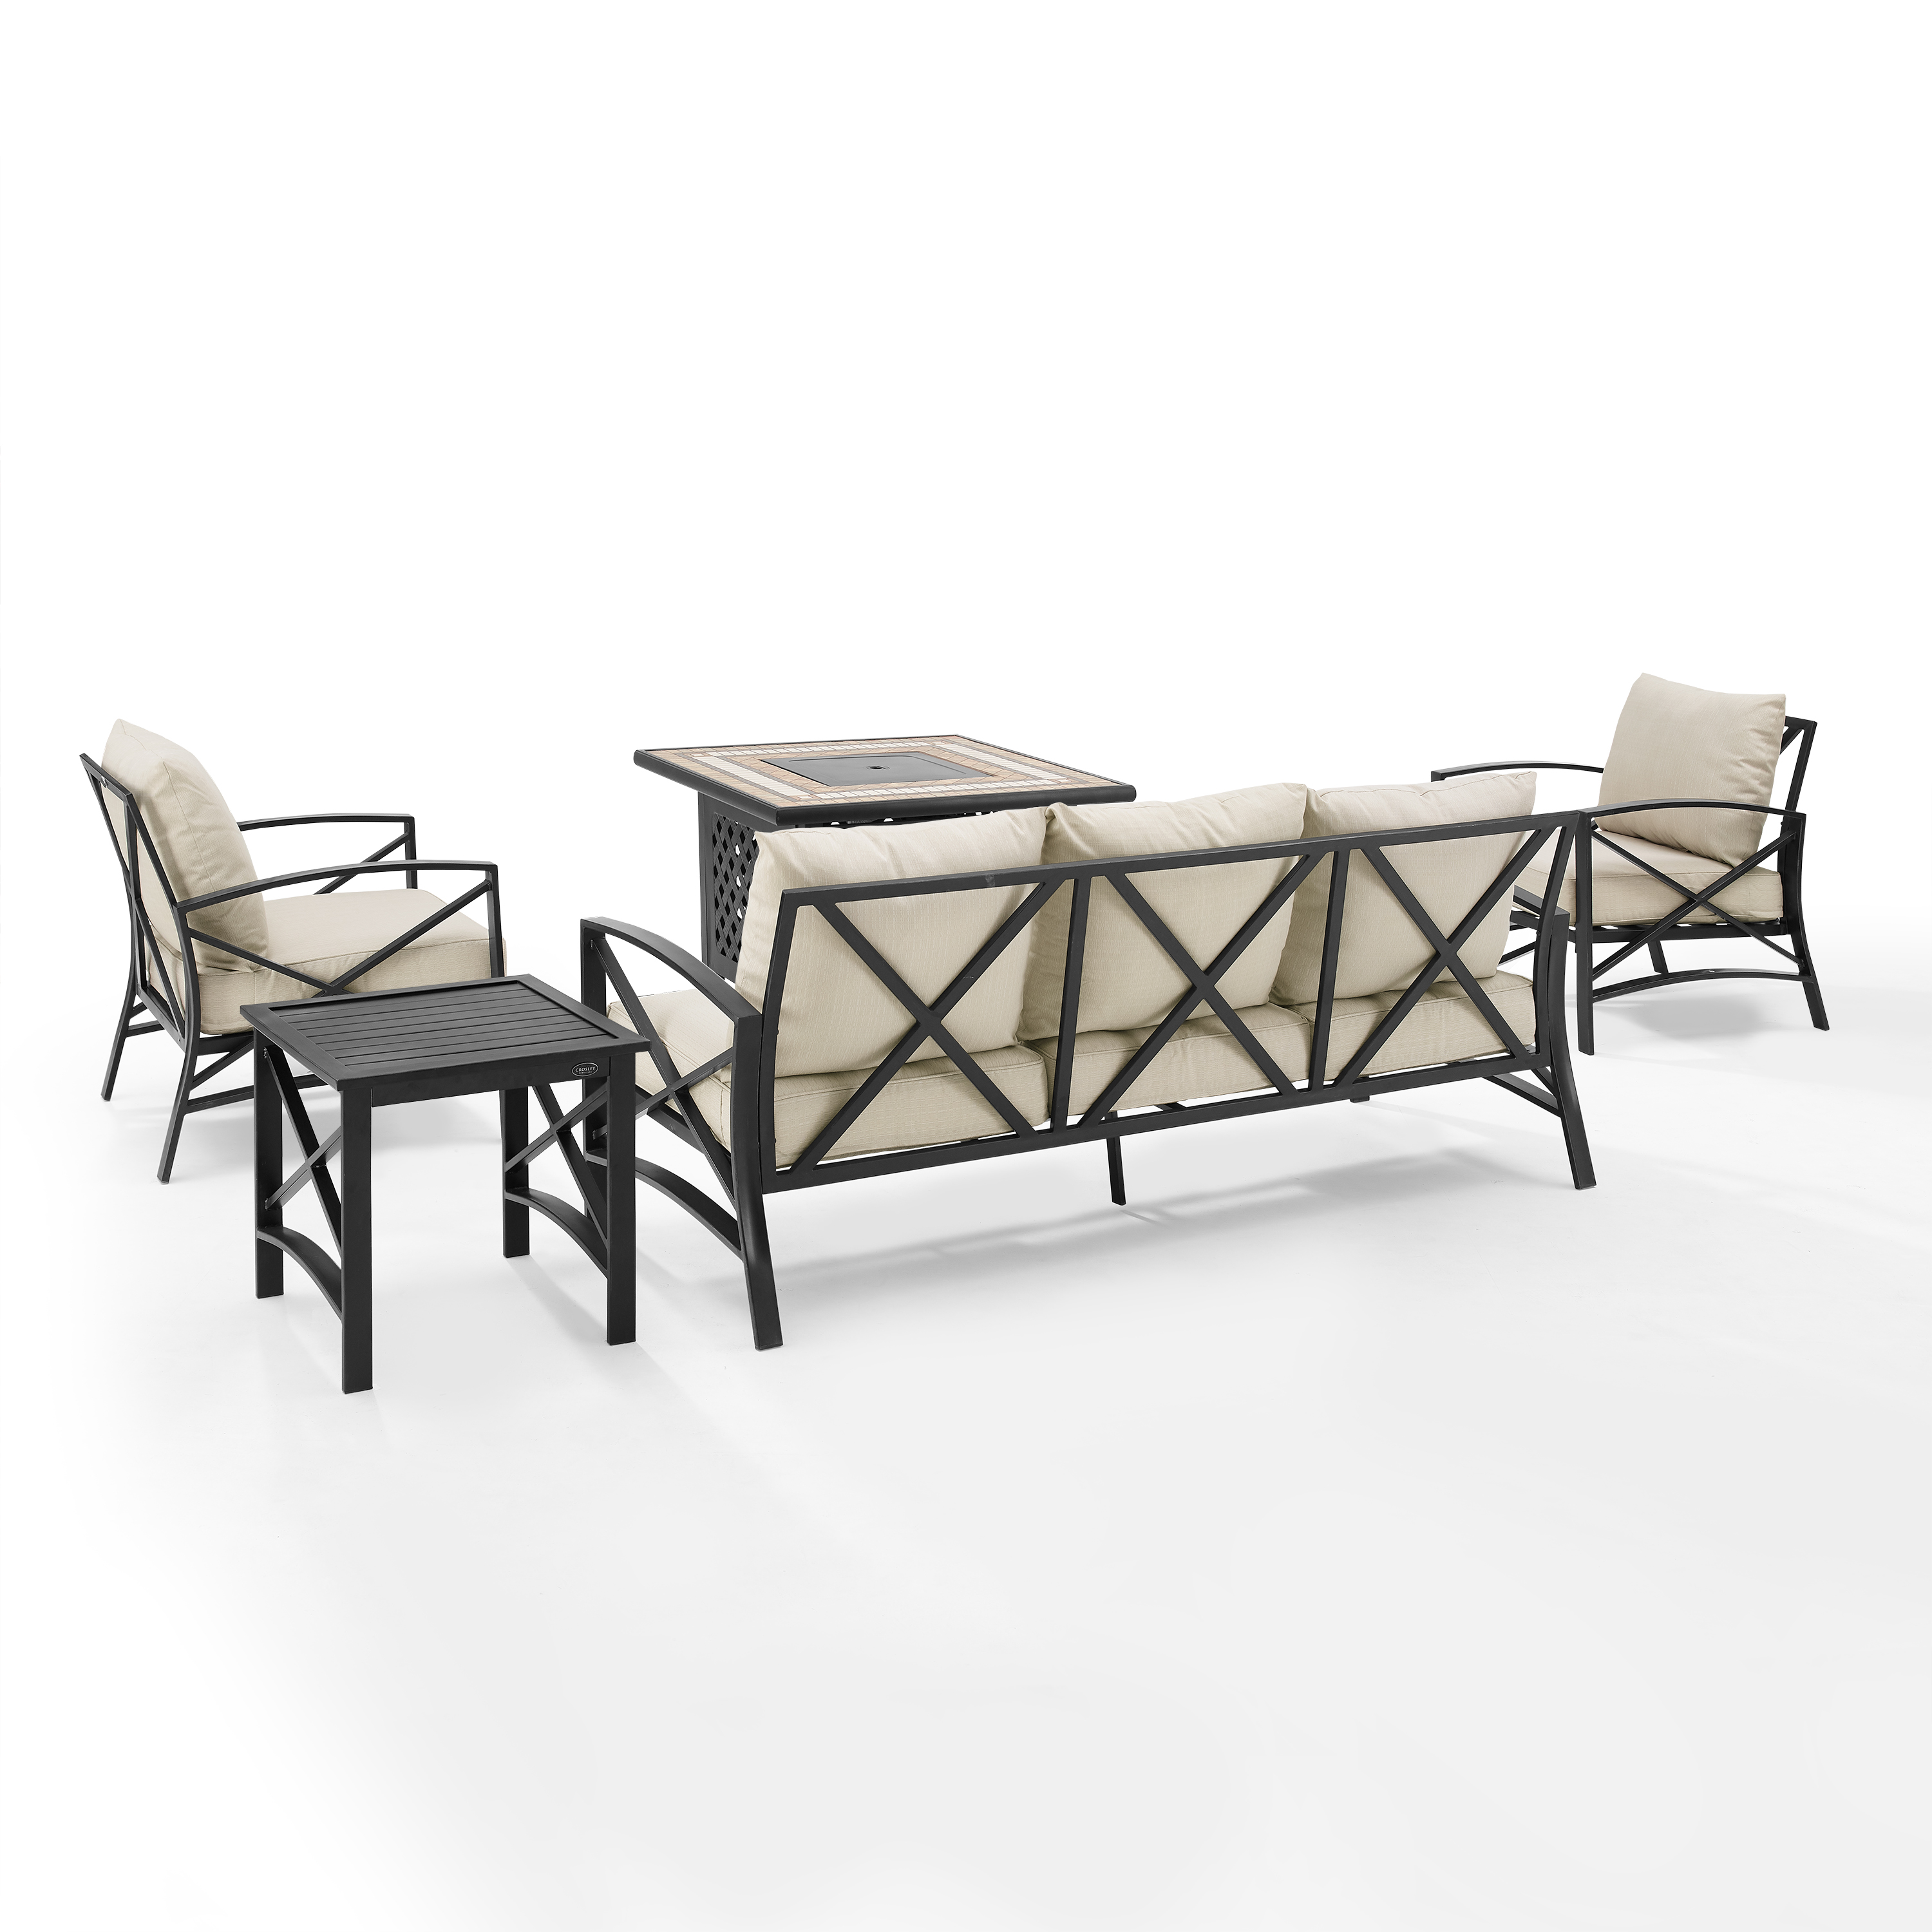 Crosley Furniture Kaplan Oil Rubbed Bronze/Oatmeal 5 Piece Outdoor Sofa Set with Fire Table - image 3 of 13